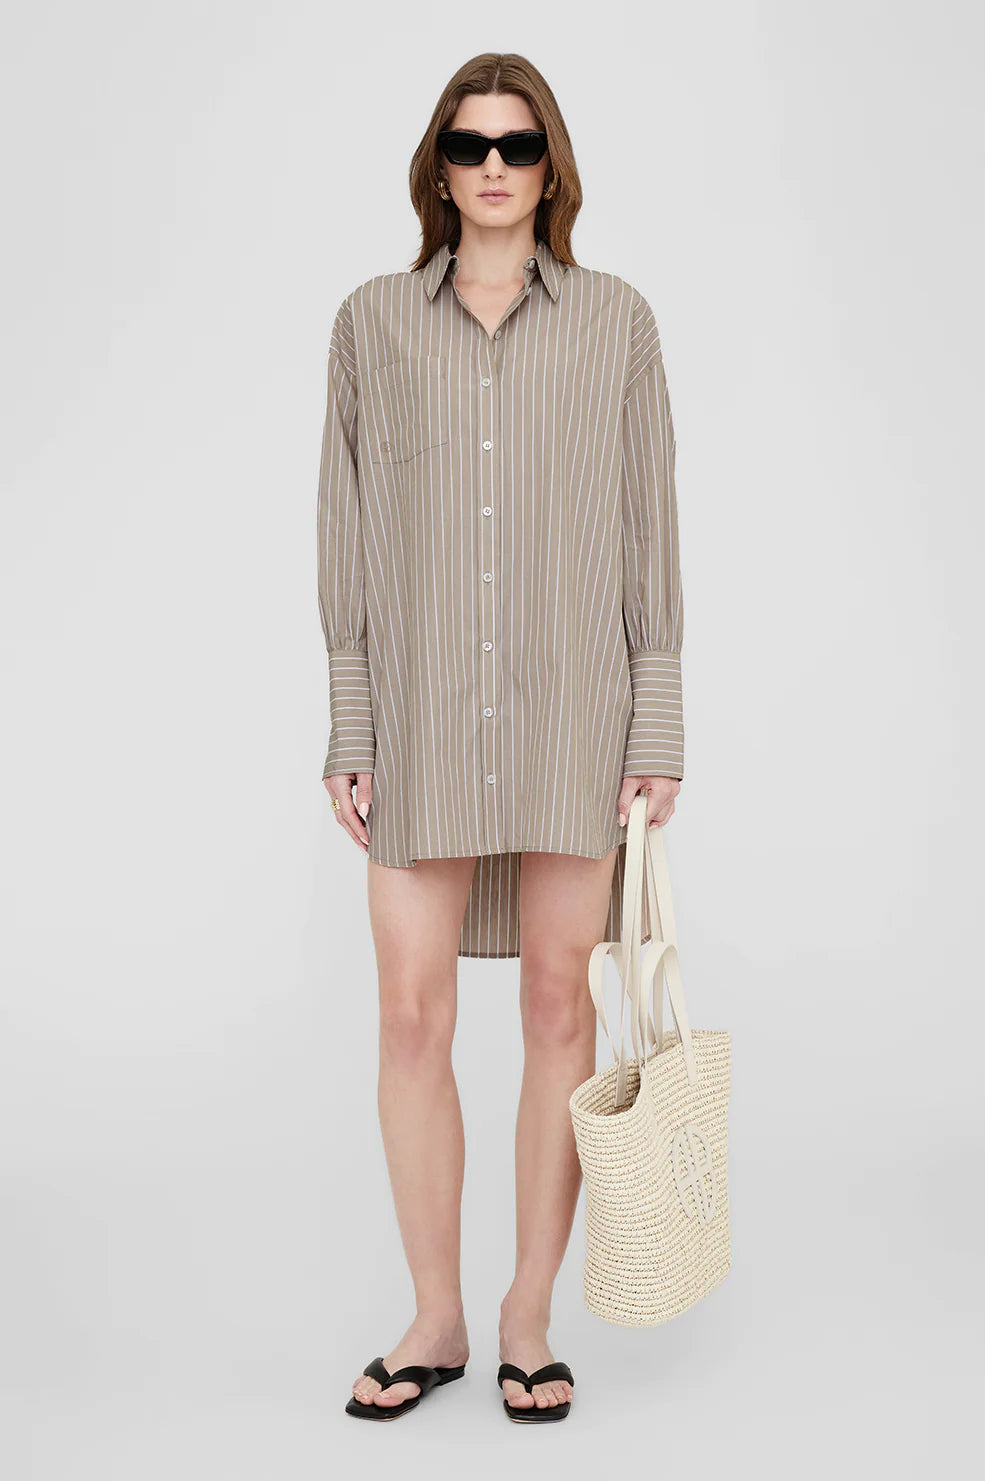 Lake Dress in Taupe and White Stripe